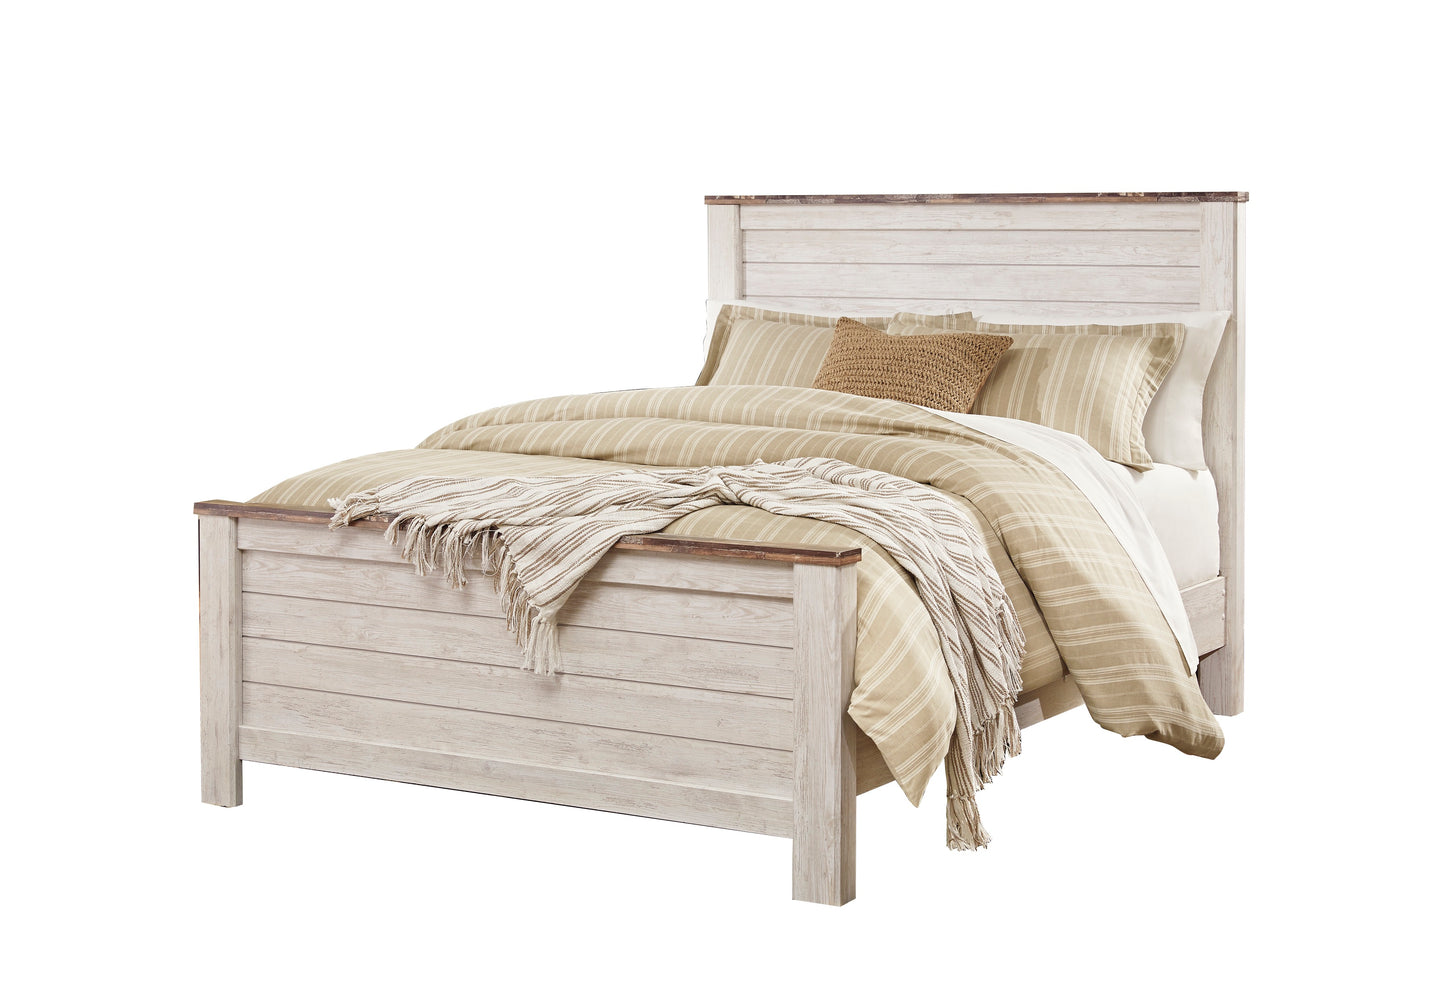 Ashley Willowton 4PC Cal King Headboard Bedroom Set in White